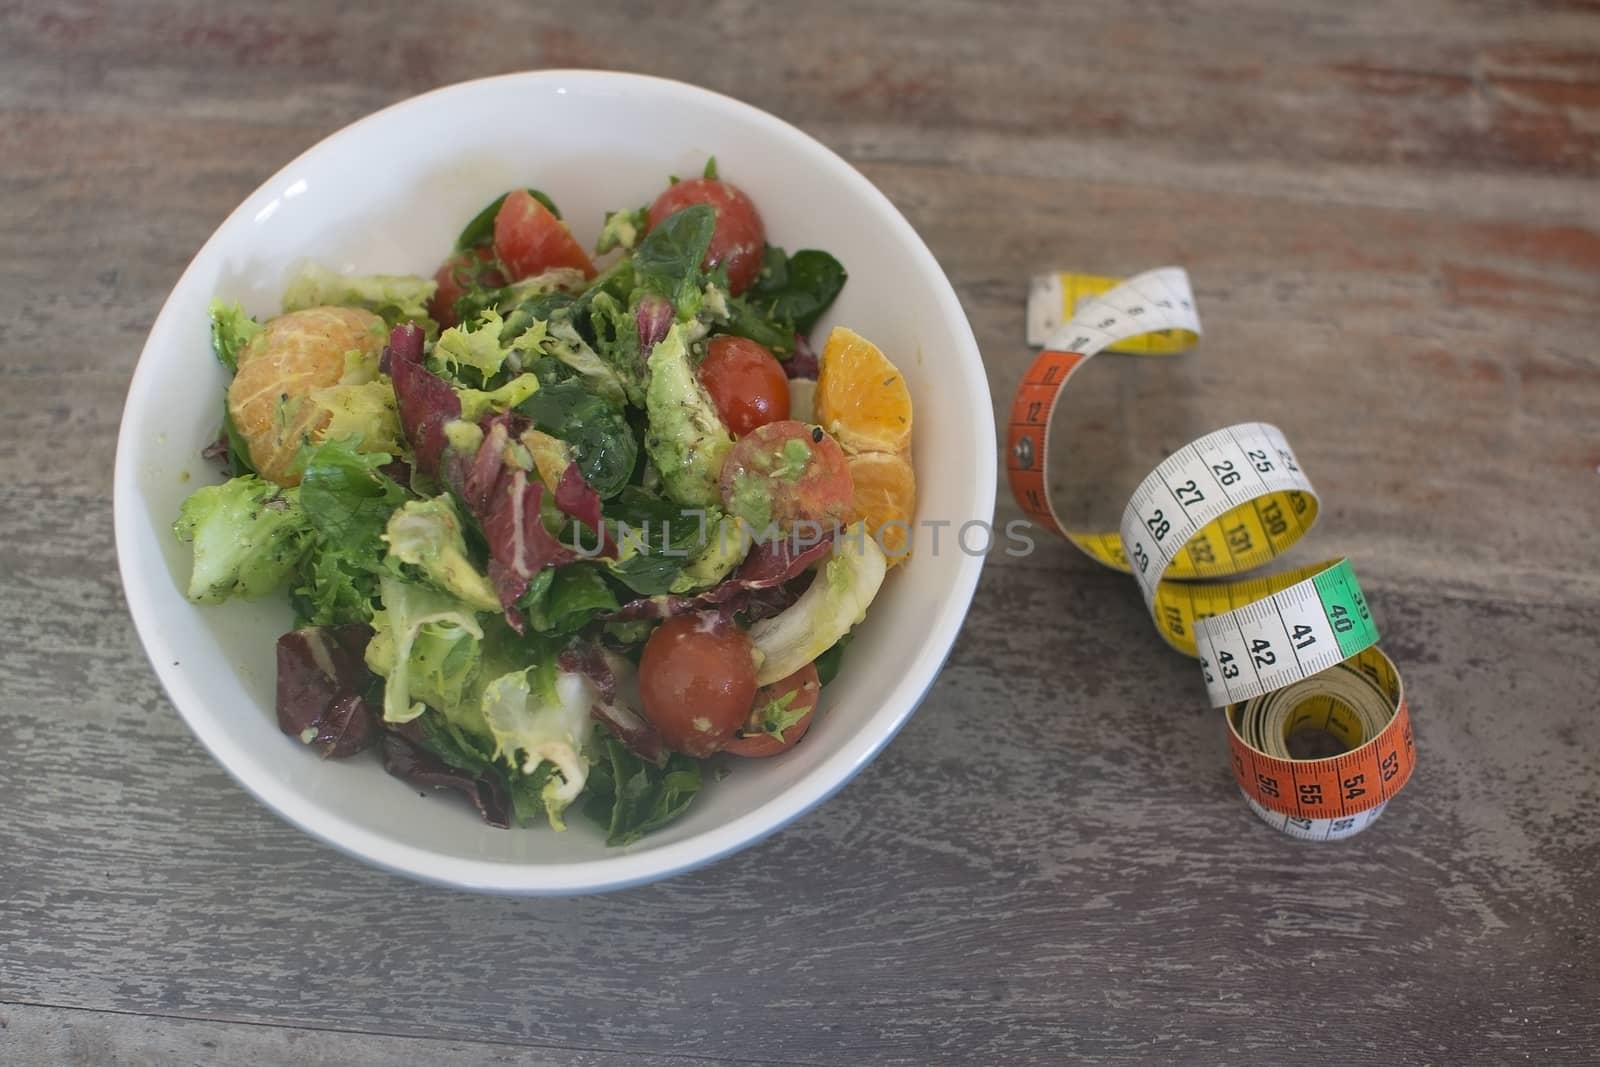 Mixed green and purple salad with measuring tape on shabby brown wooden table dieting fitness health conceptual background.